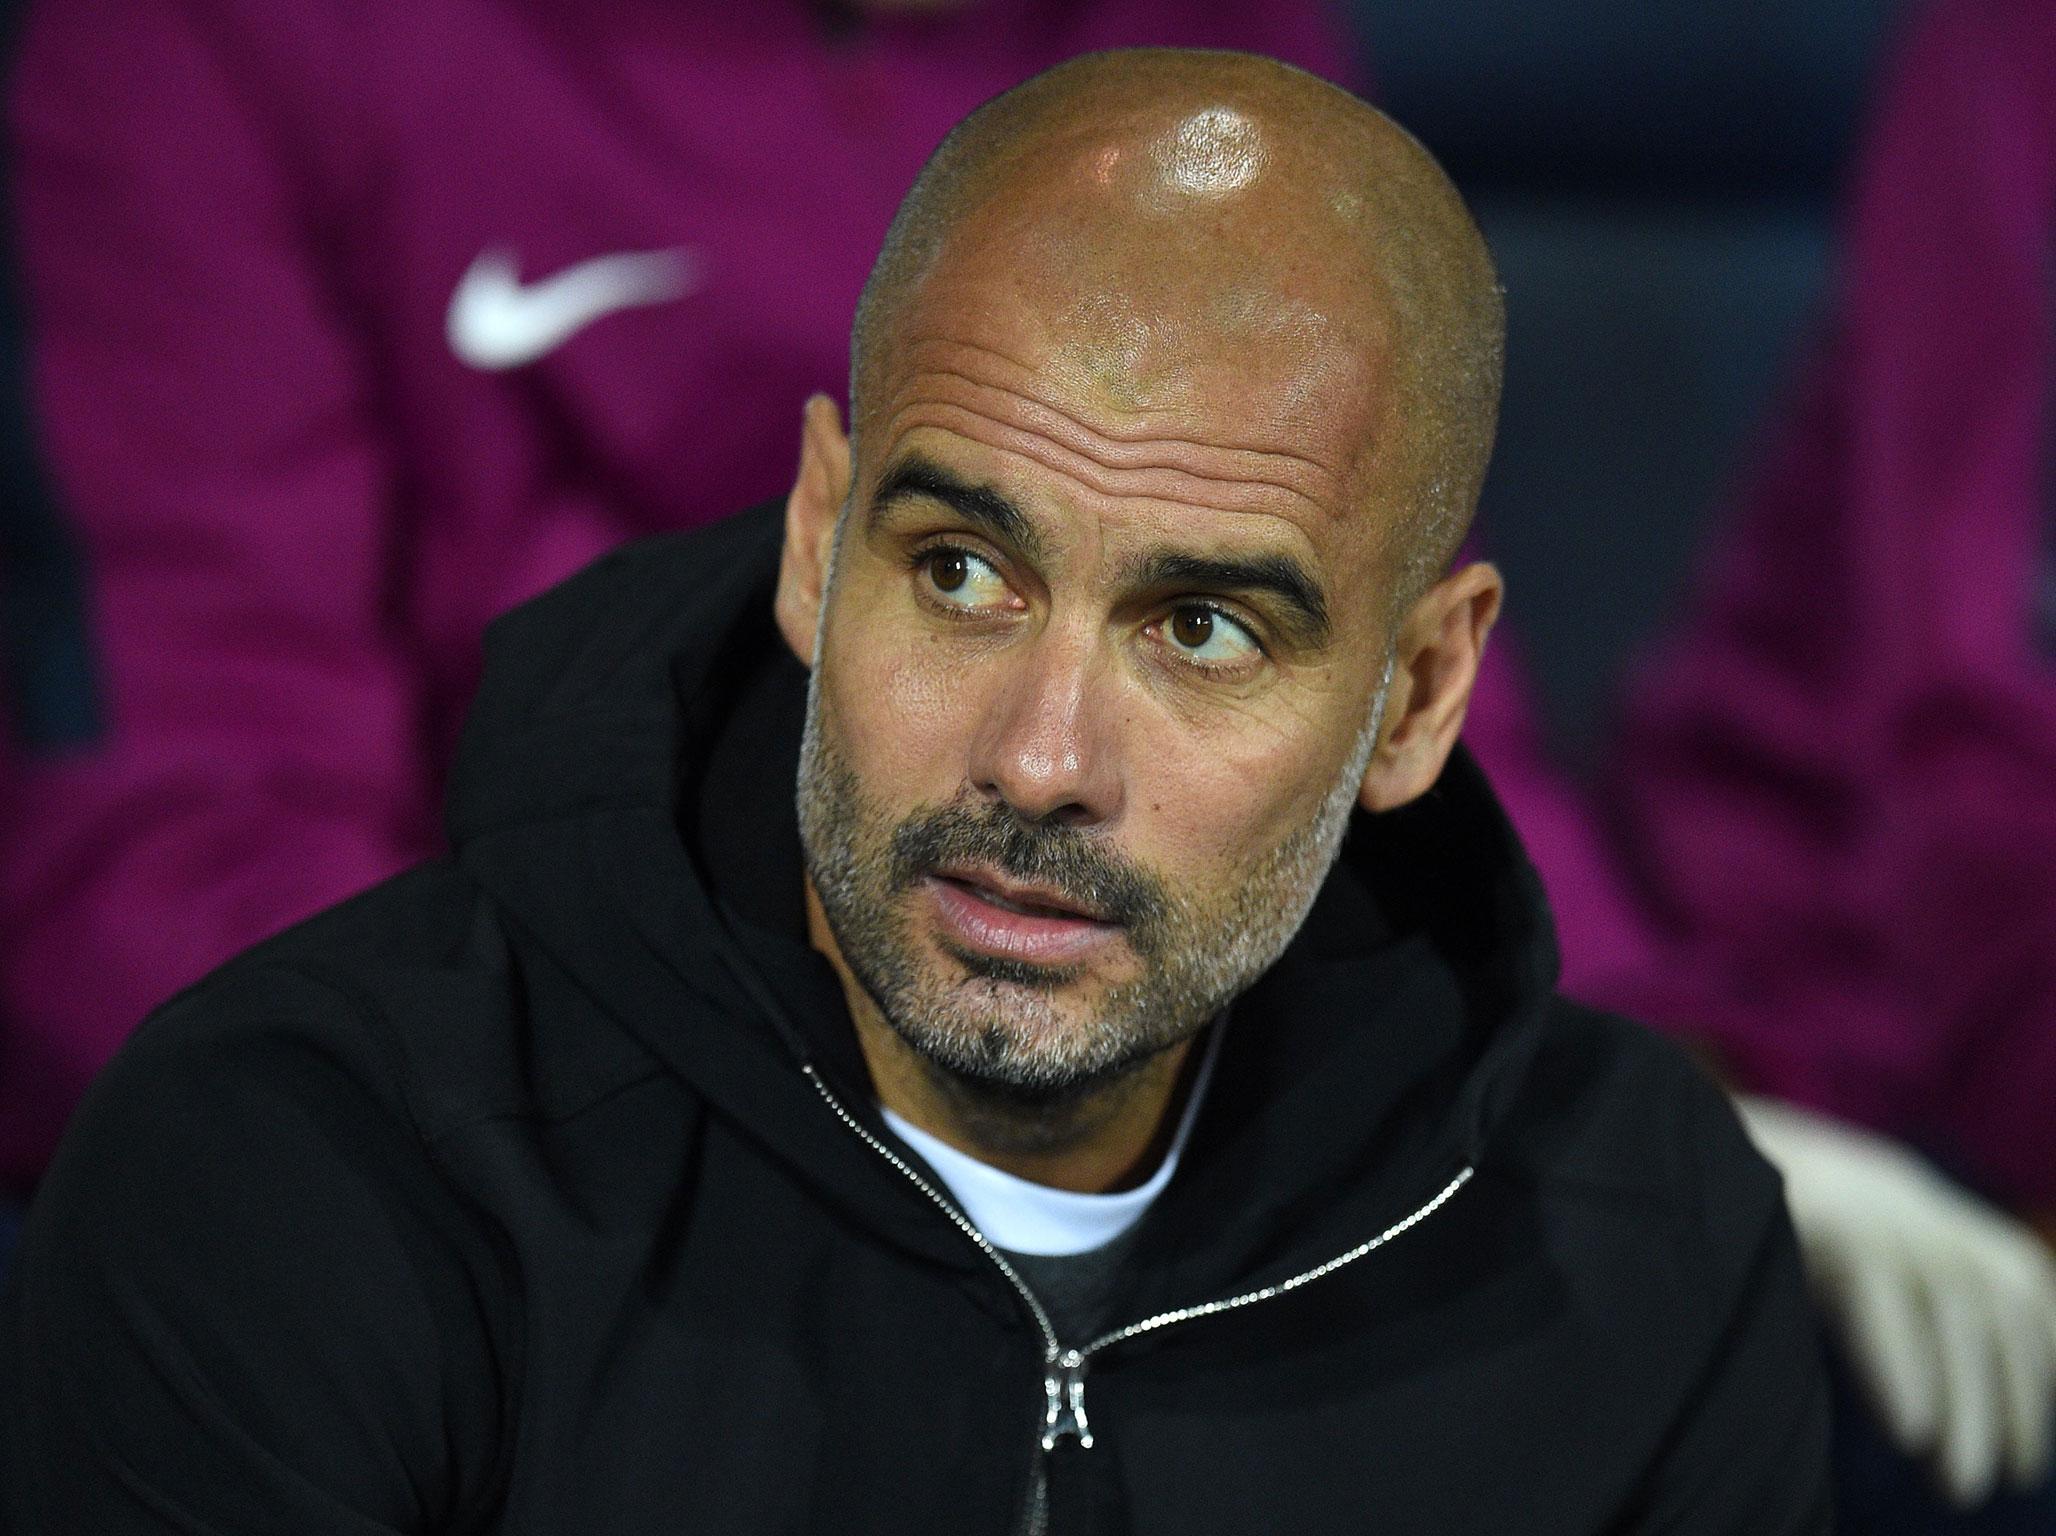 Pep Guardiola has joined Jose Mourinho in criticising the EFL Cup